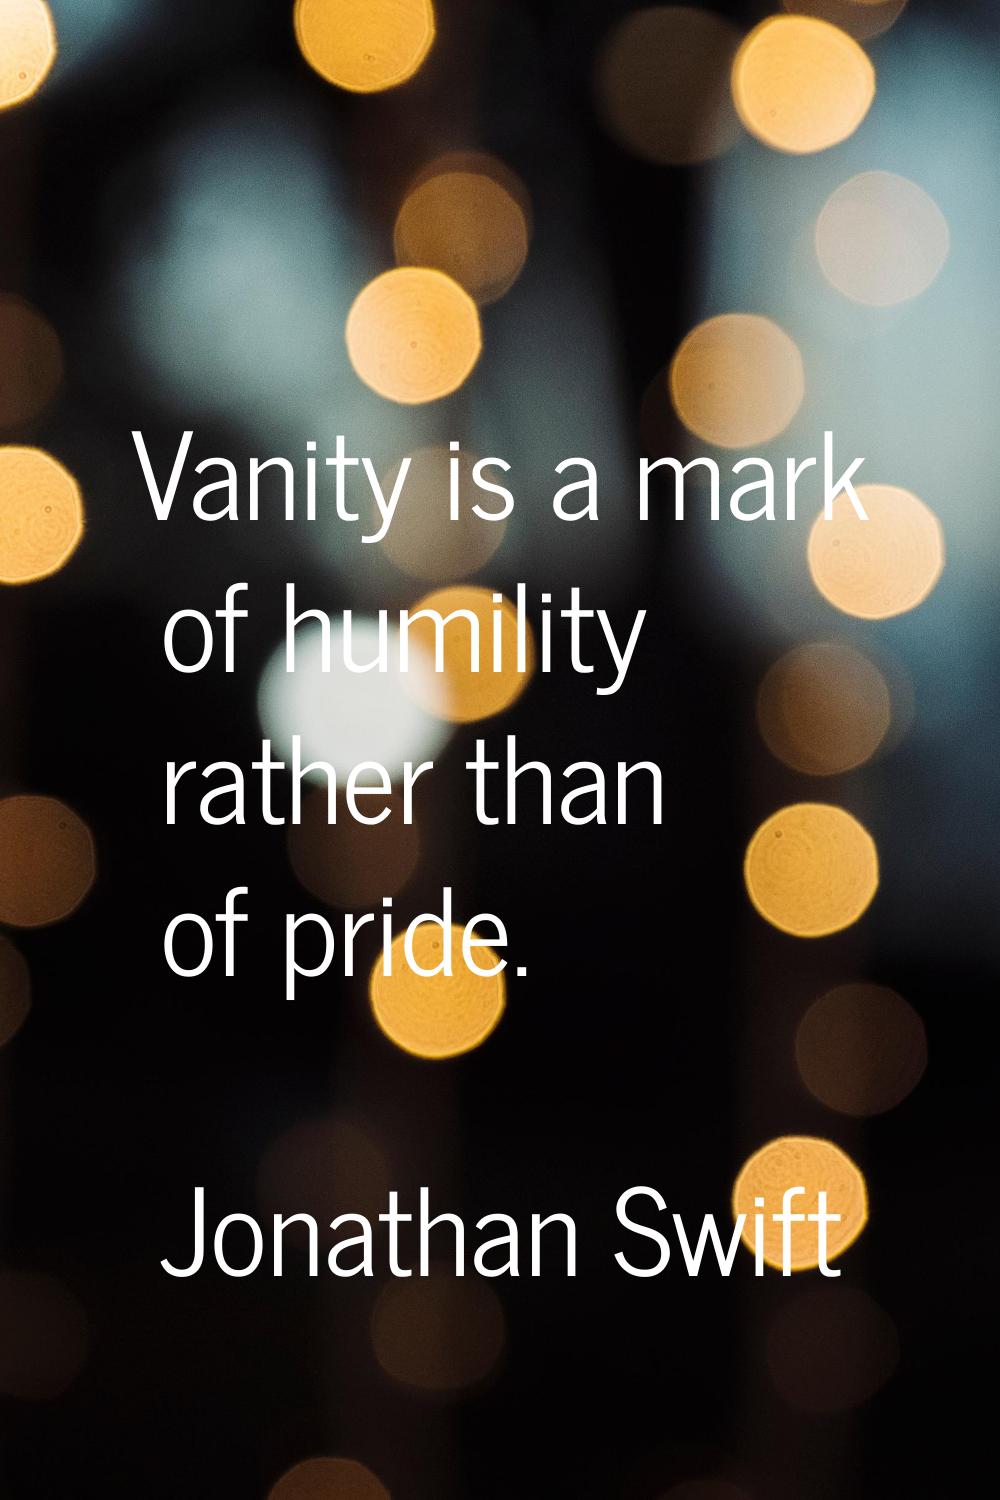 Vanity is a mark of humility rather than of pride.